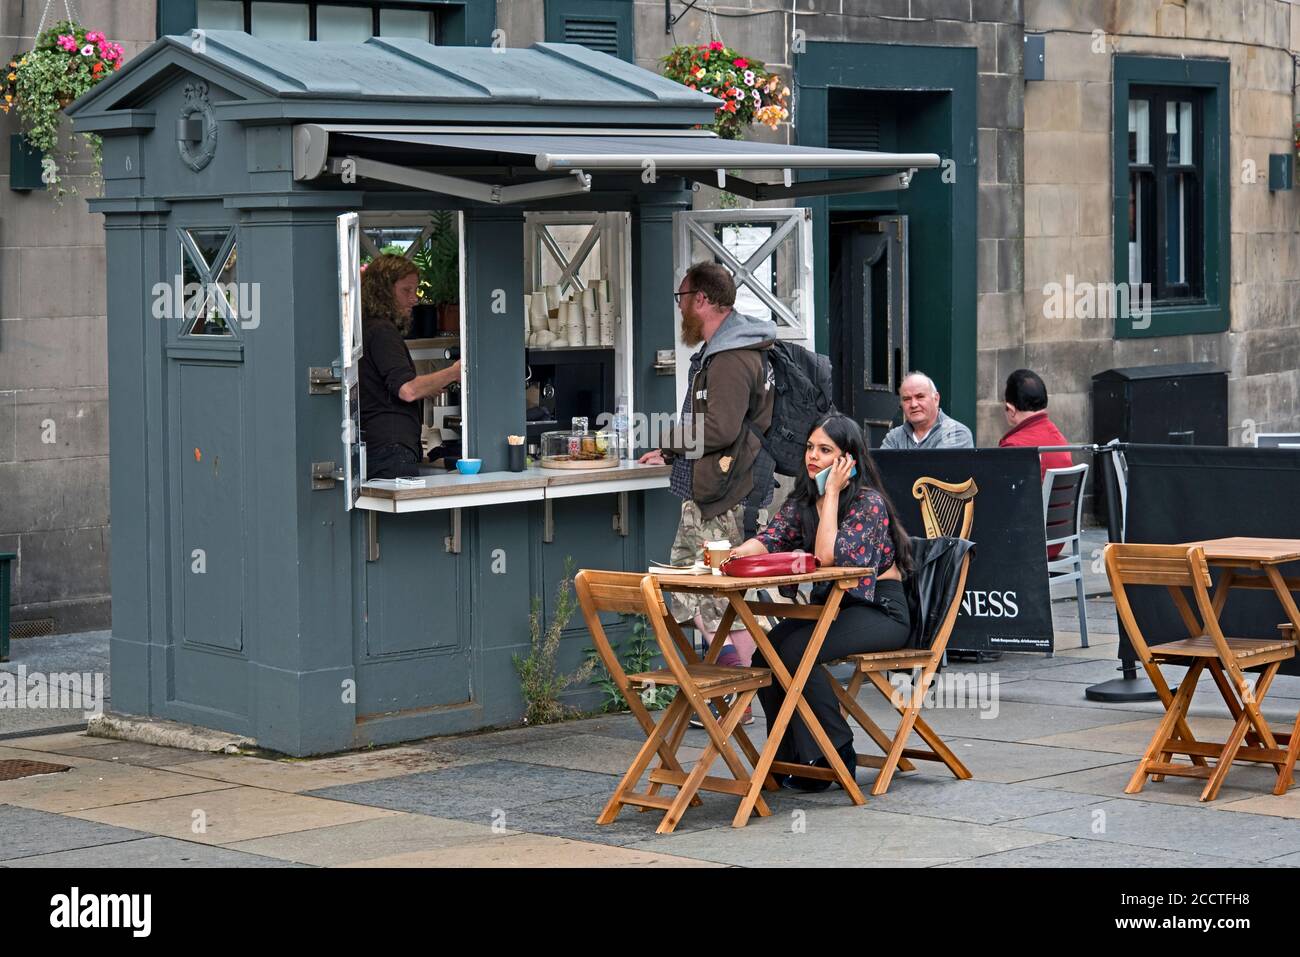 A former police box in Edinburgh which has been converted into a coffee stall on Lothian Road, Edinburgh, Scotland, UK. Stock Photo